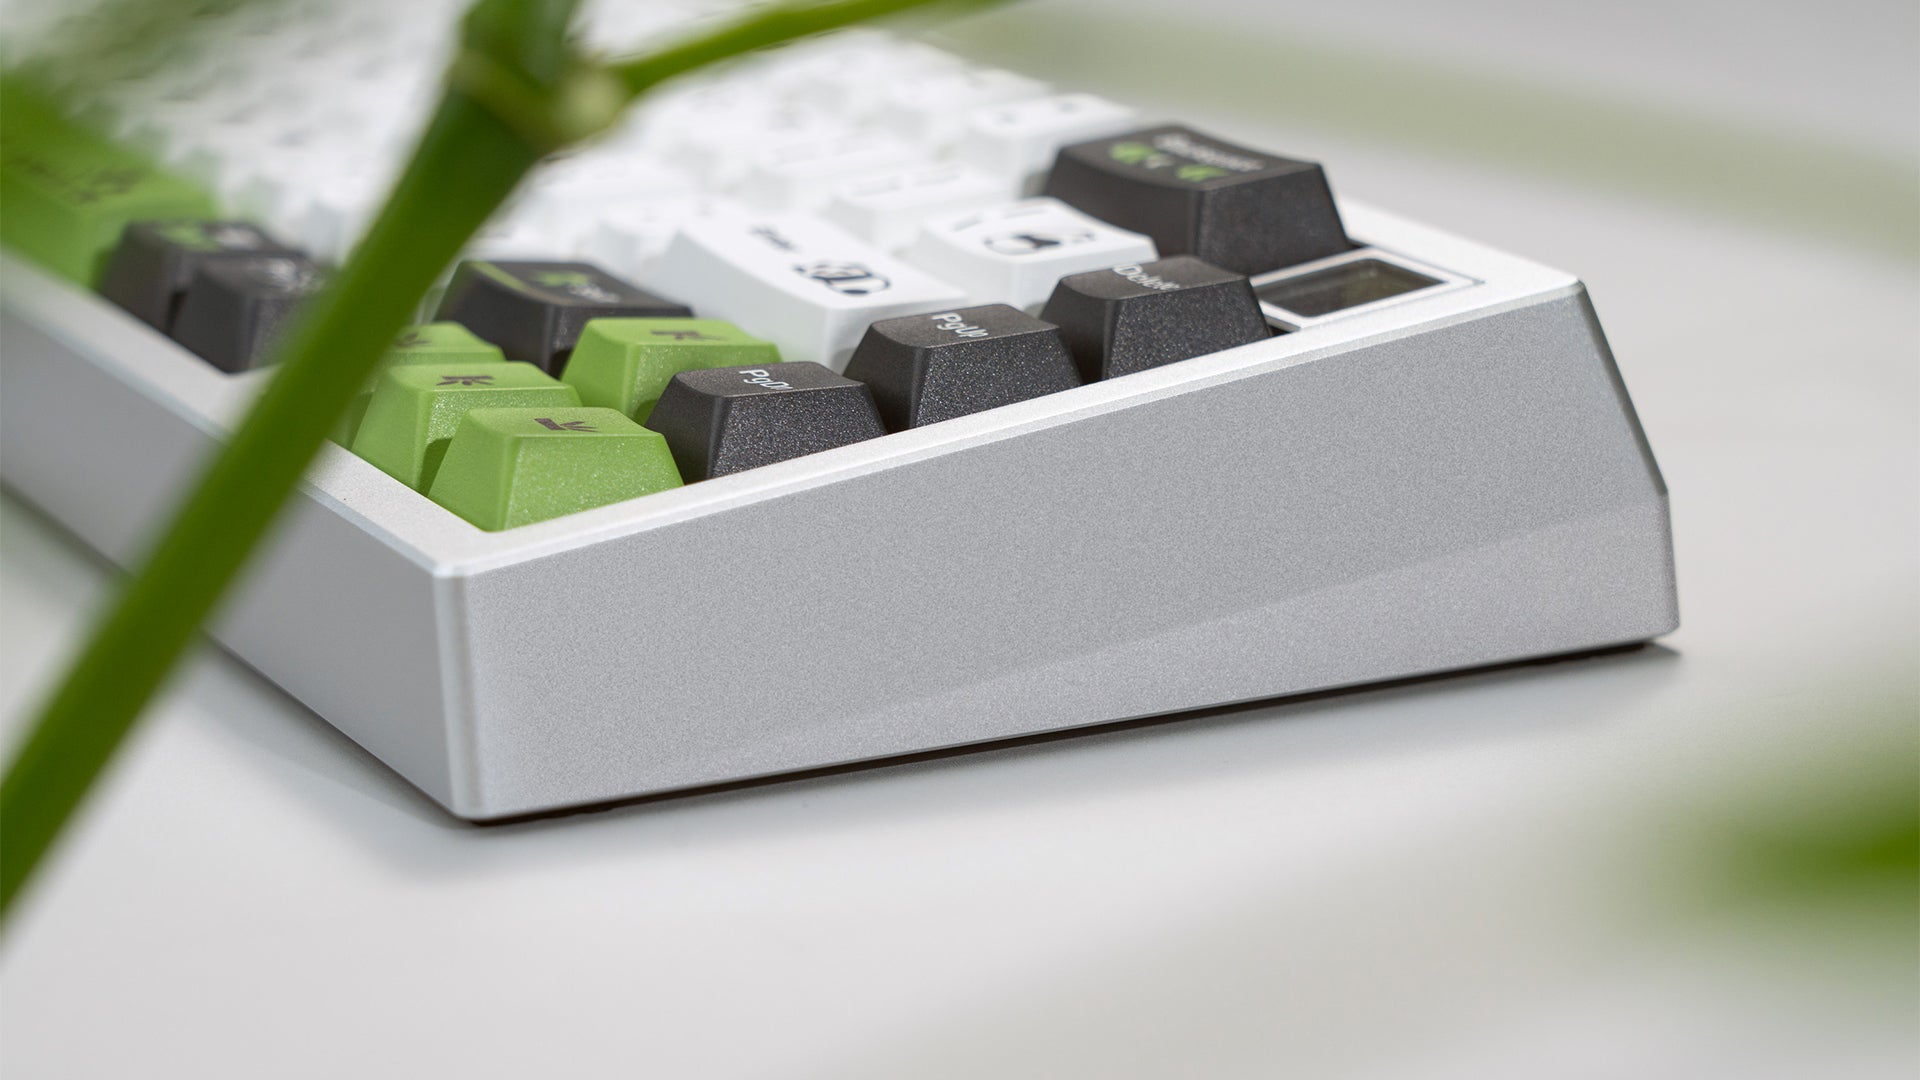 [Group-Buy] Zoom65 V3 - Special Panda Edition